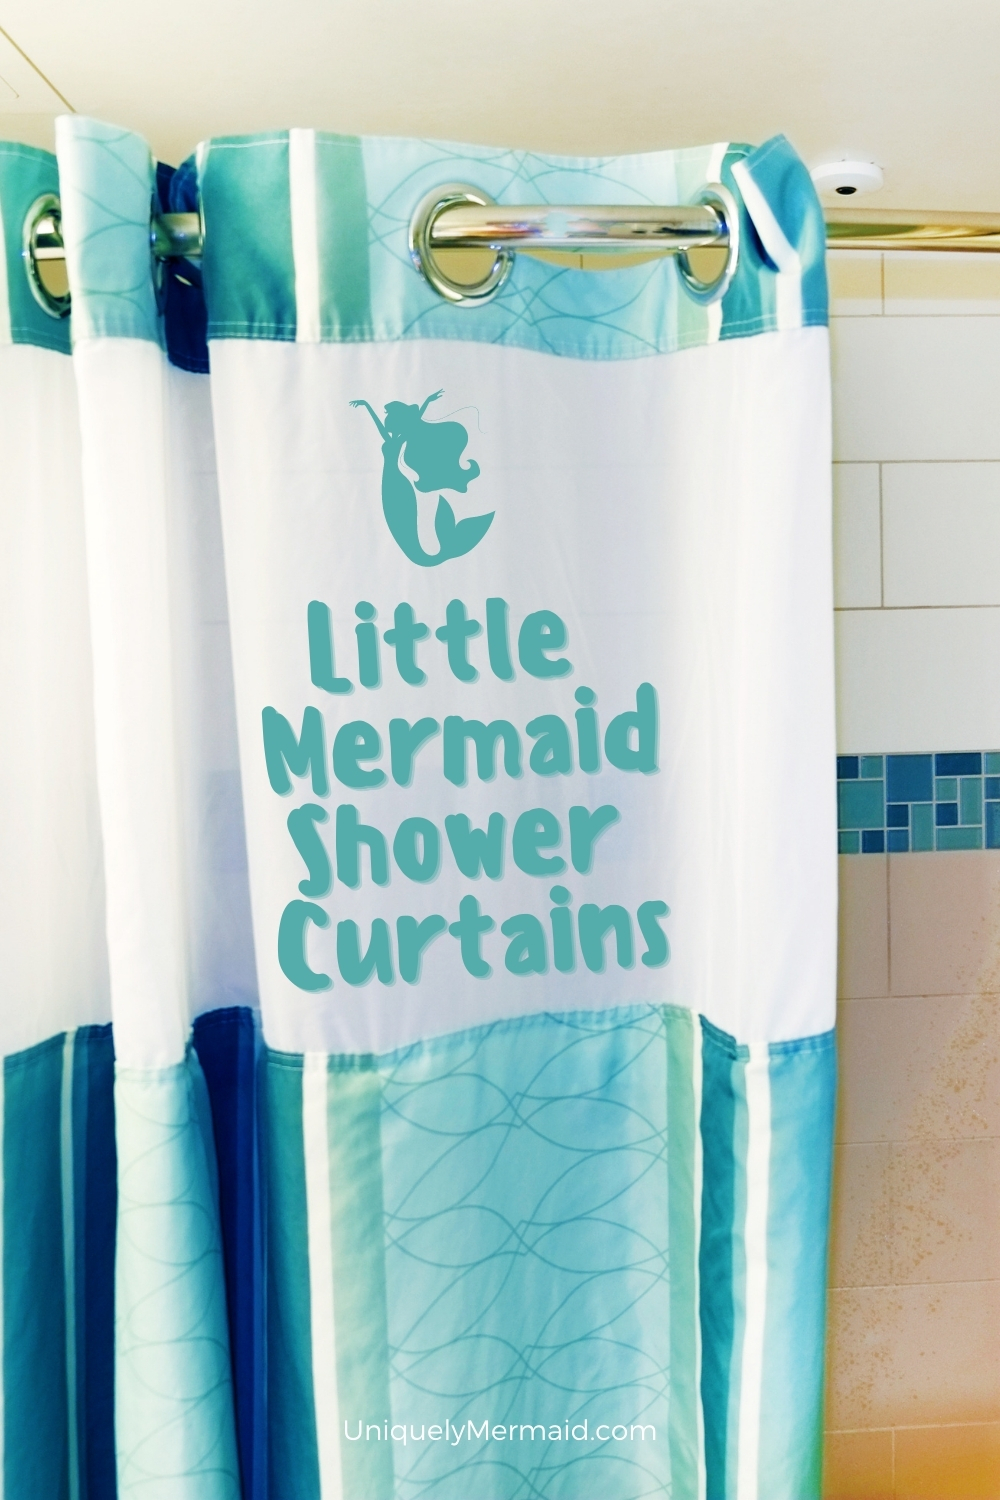 Make a splash in the bathroom with Little Mermaid shower curtains! These adorable under-the-sea themes feature colorful designs and cute slogans.